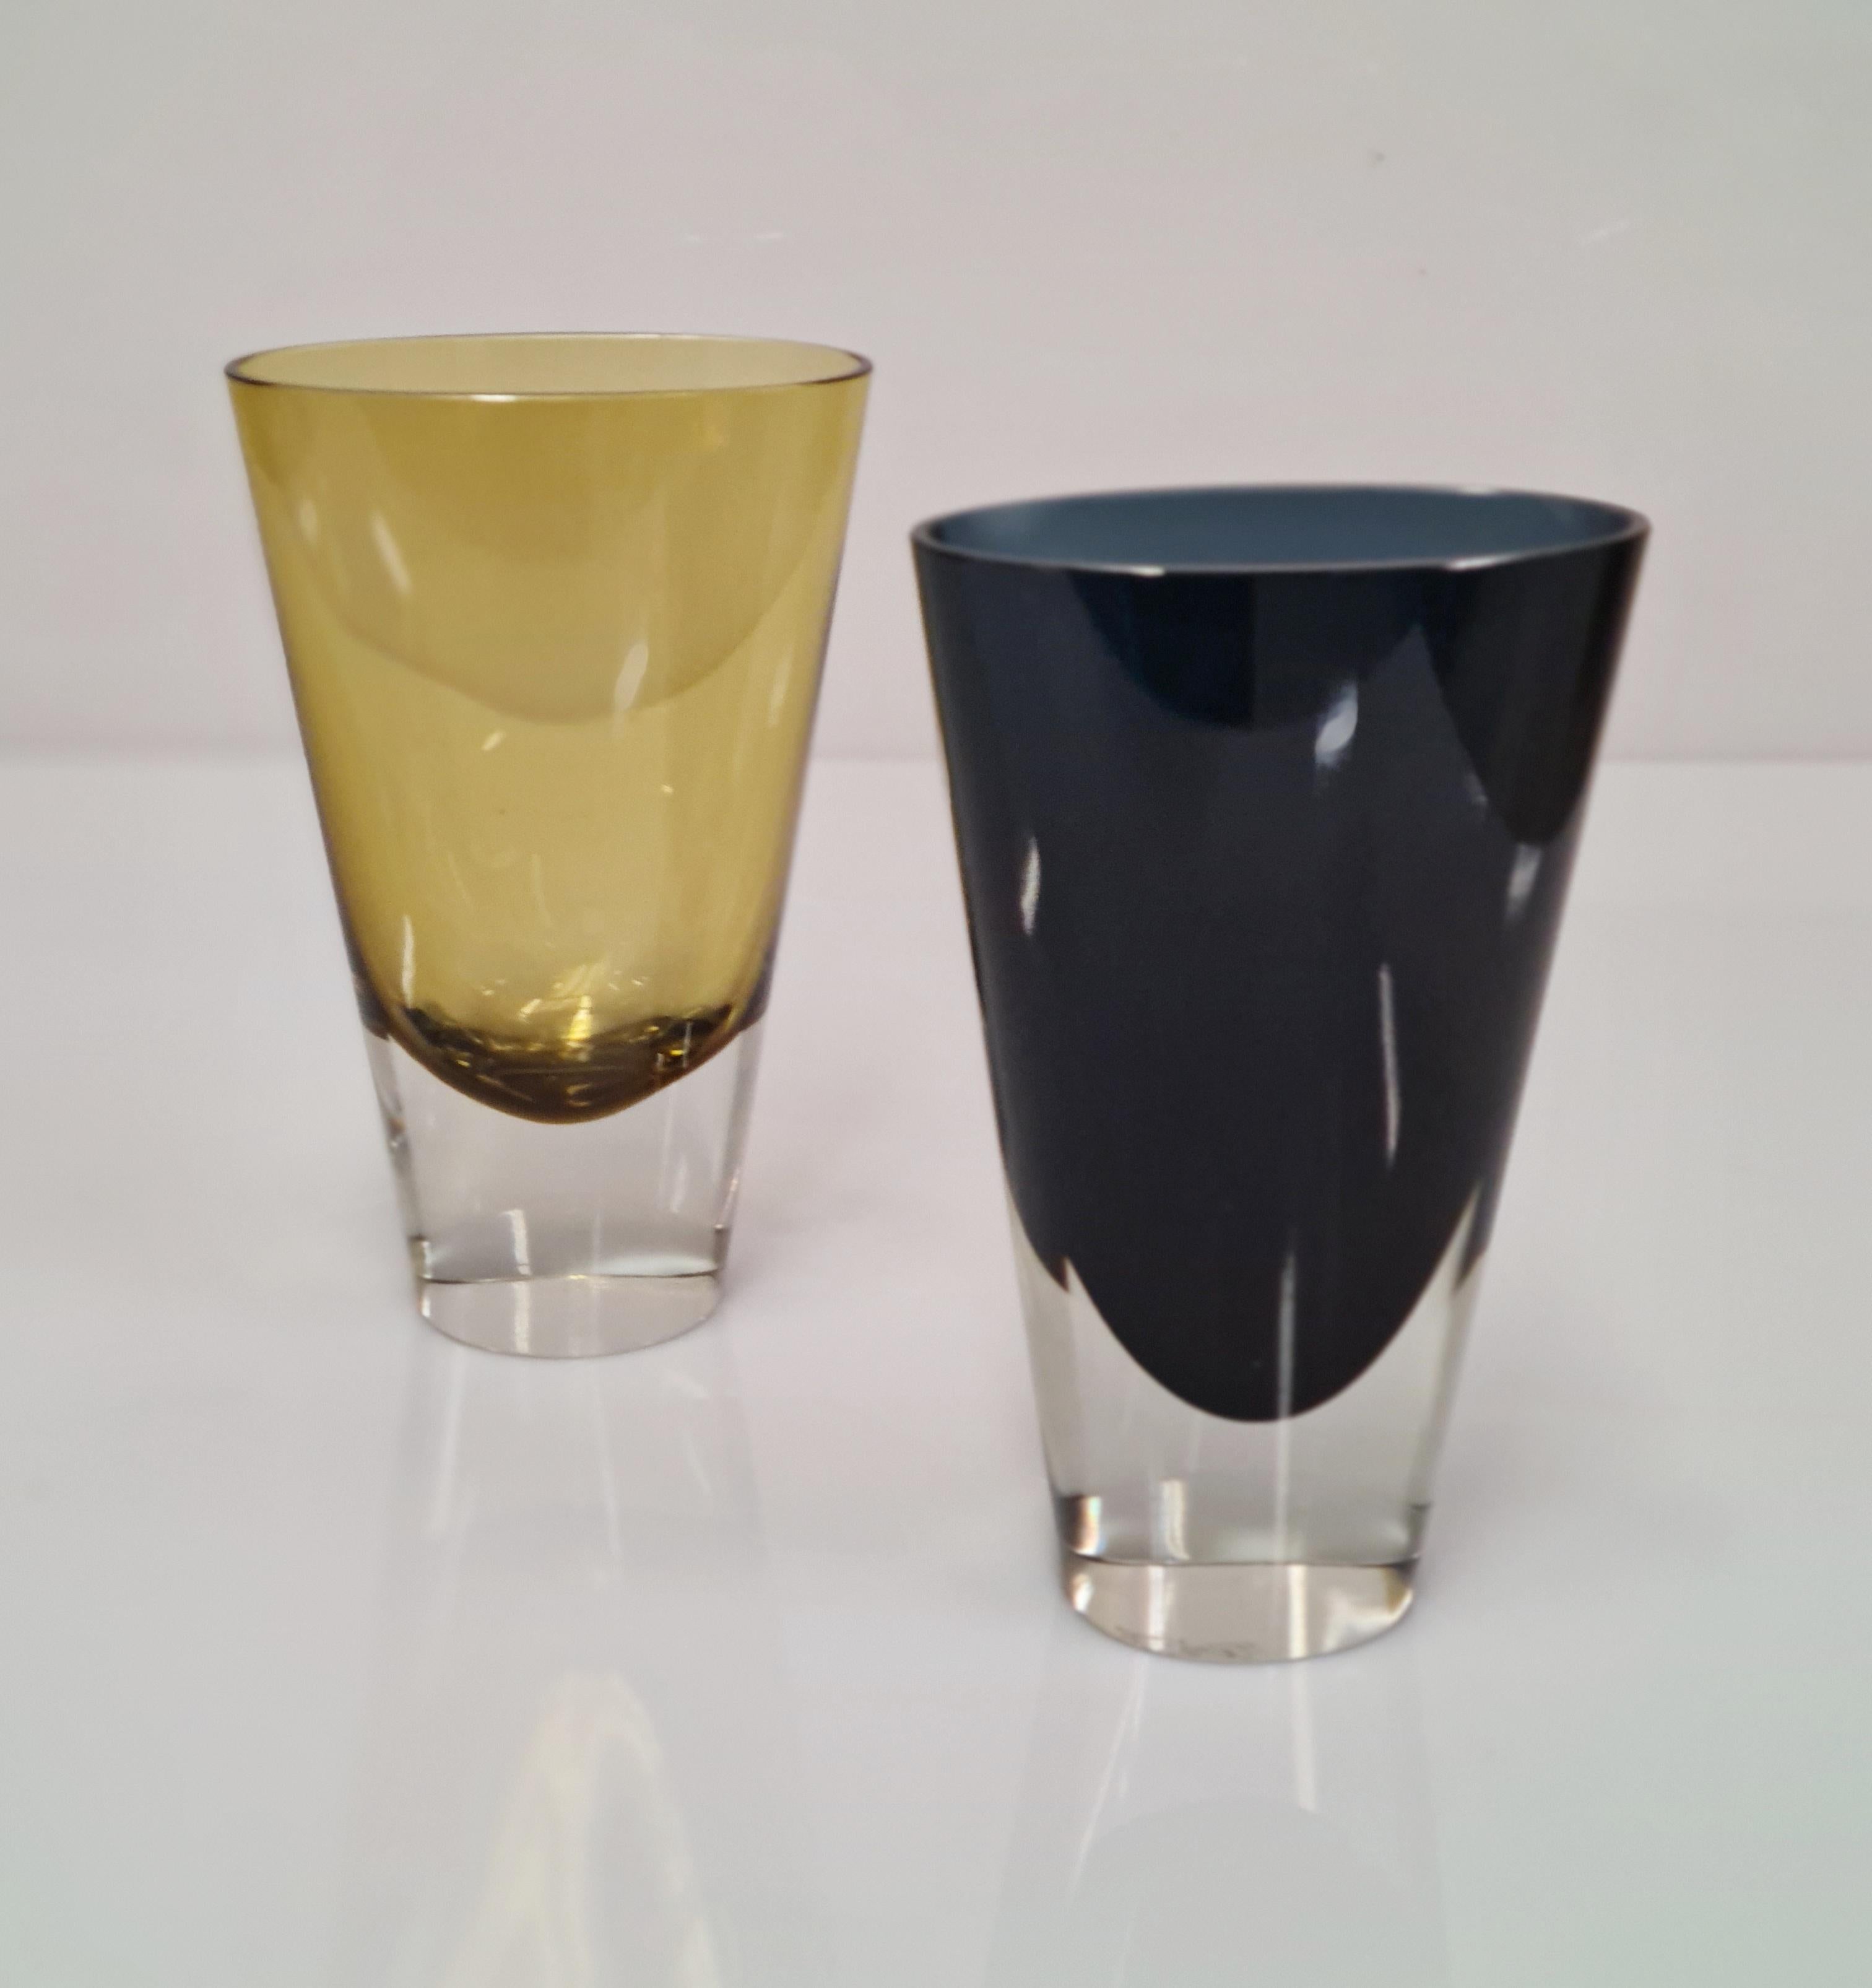 Kaj Frank (1911-1989), was a pioneer of sustainable development in the art glass area in Finland. He designed these tapered glass vases with oval rims and oval bases model KF 234 and this model was in producion during 1955-1964 period. The colors of